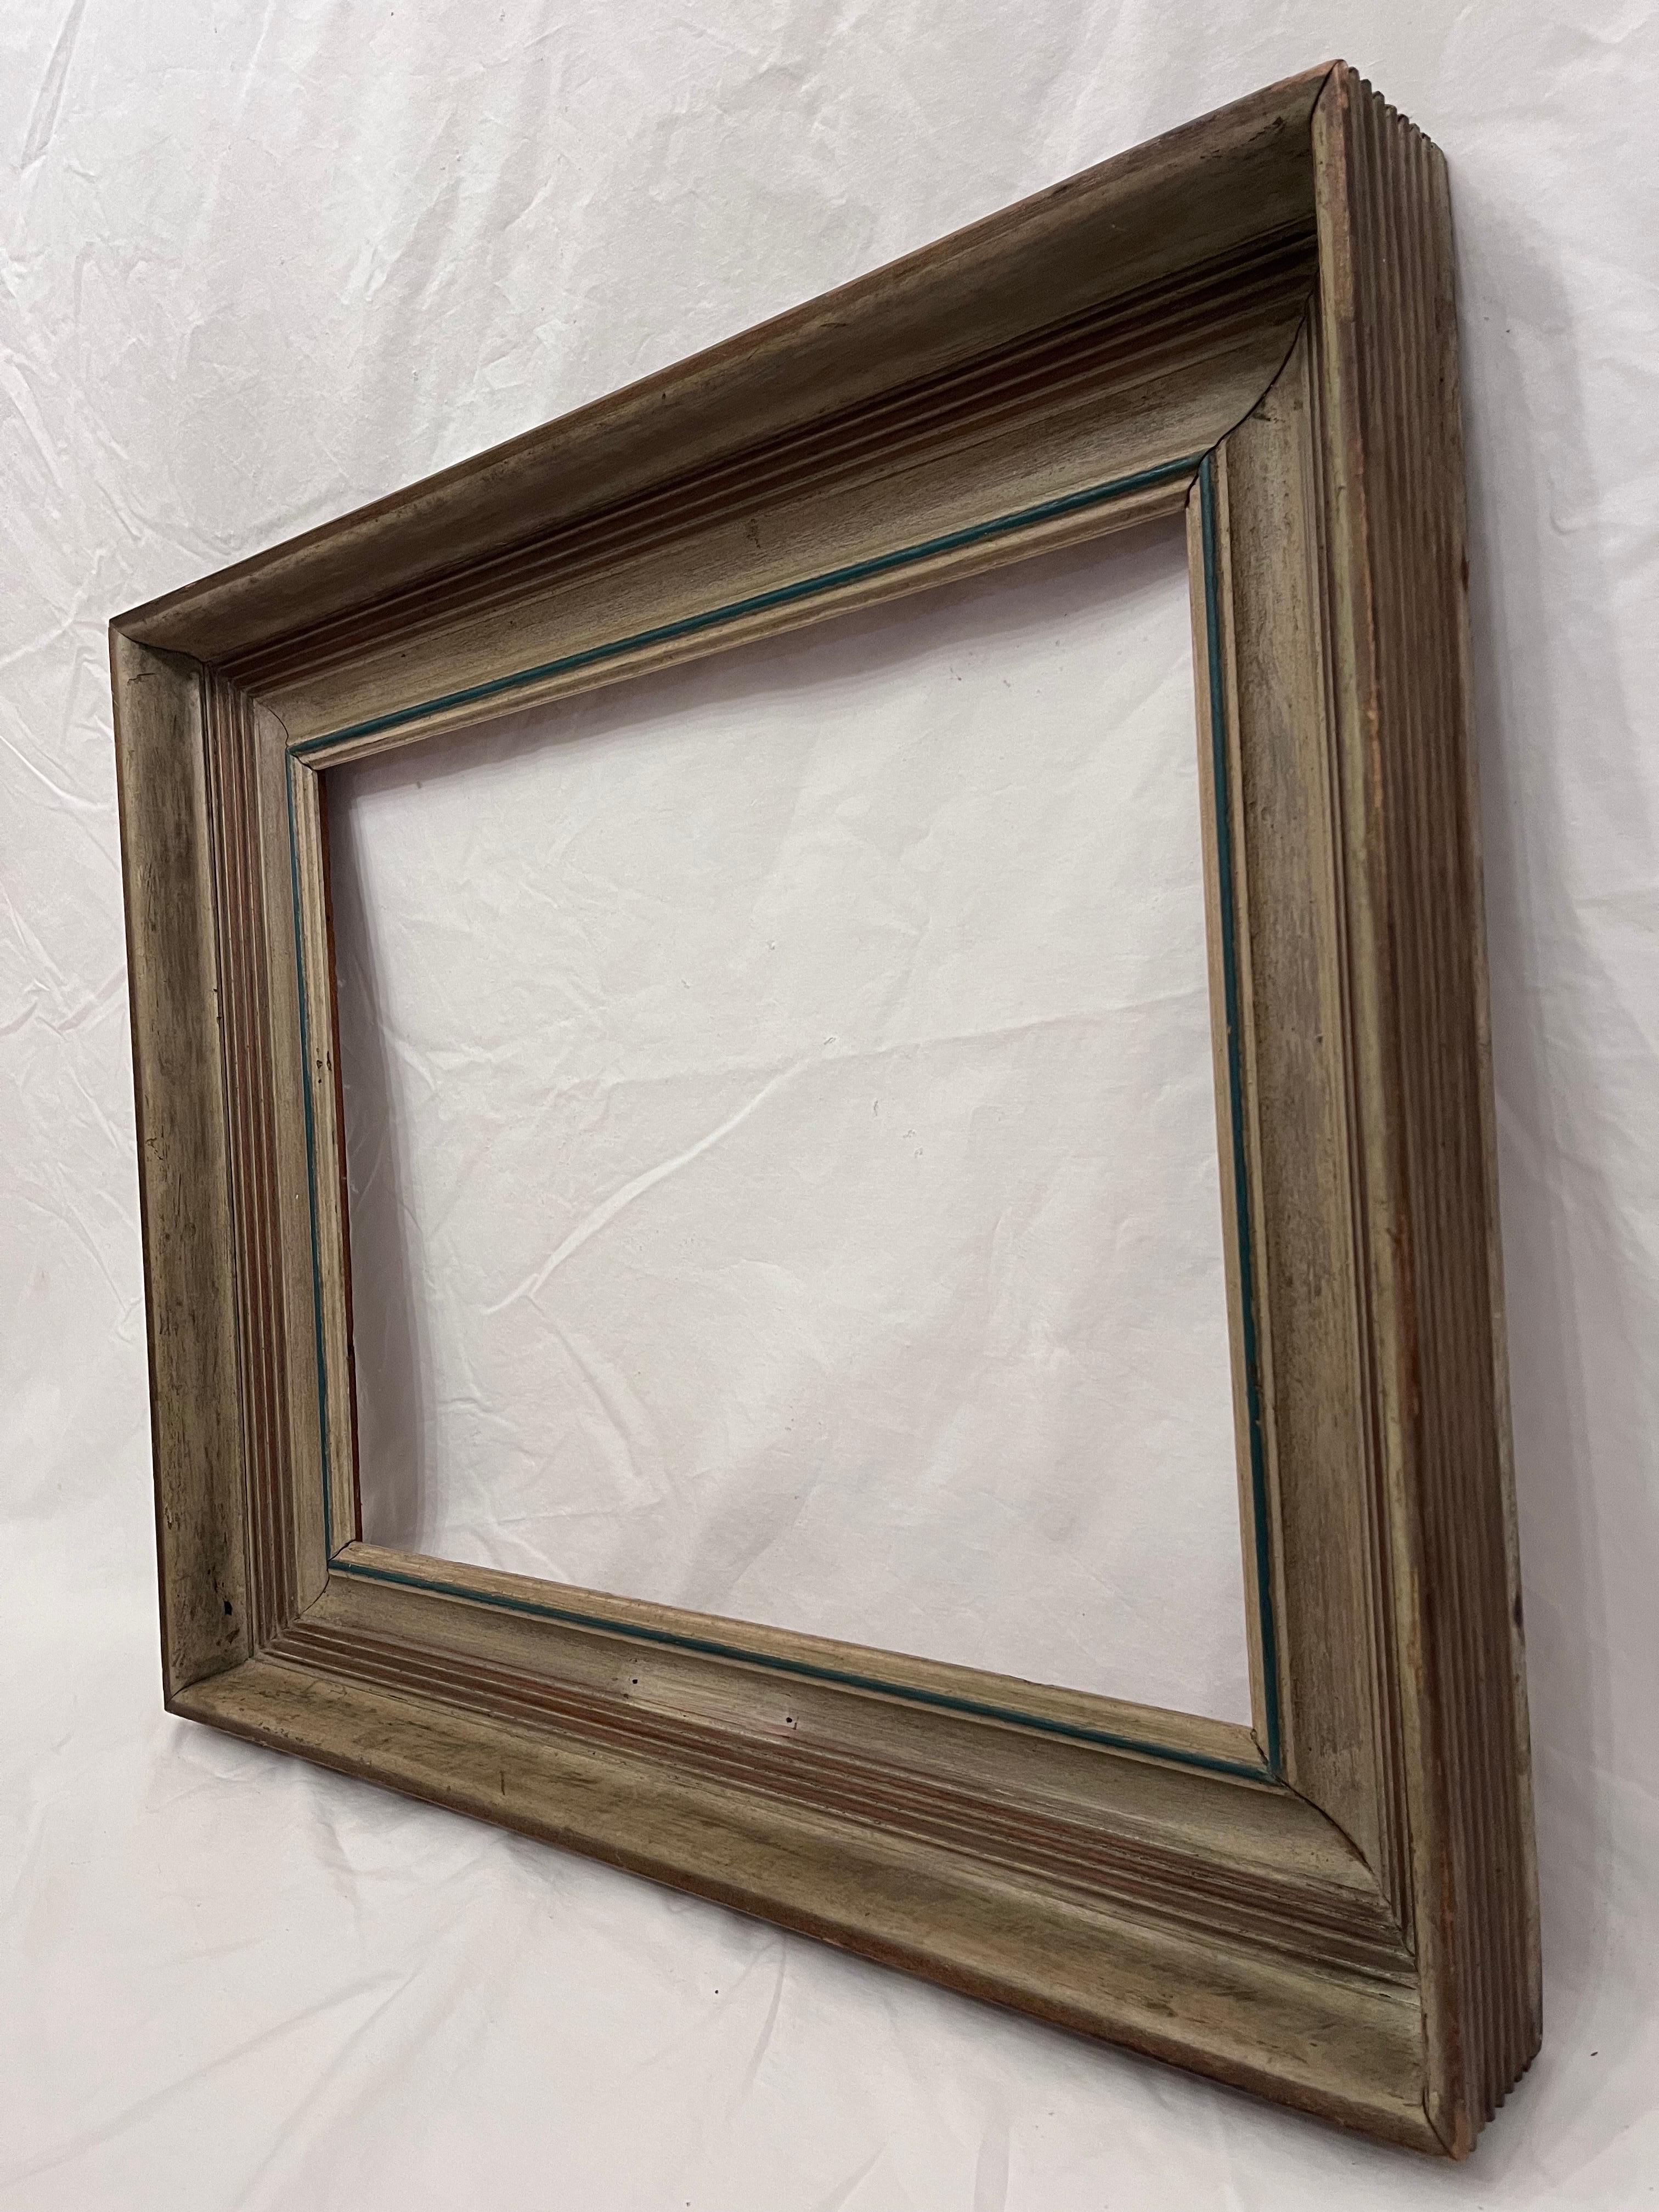 A striking deep profile mid 20th century circa 1950's American Modernist style picture frame. The rabbet size (size that holds the art) is 20.25